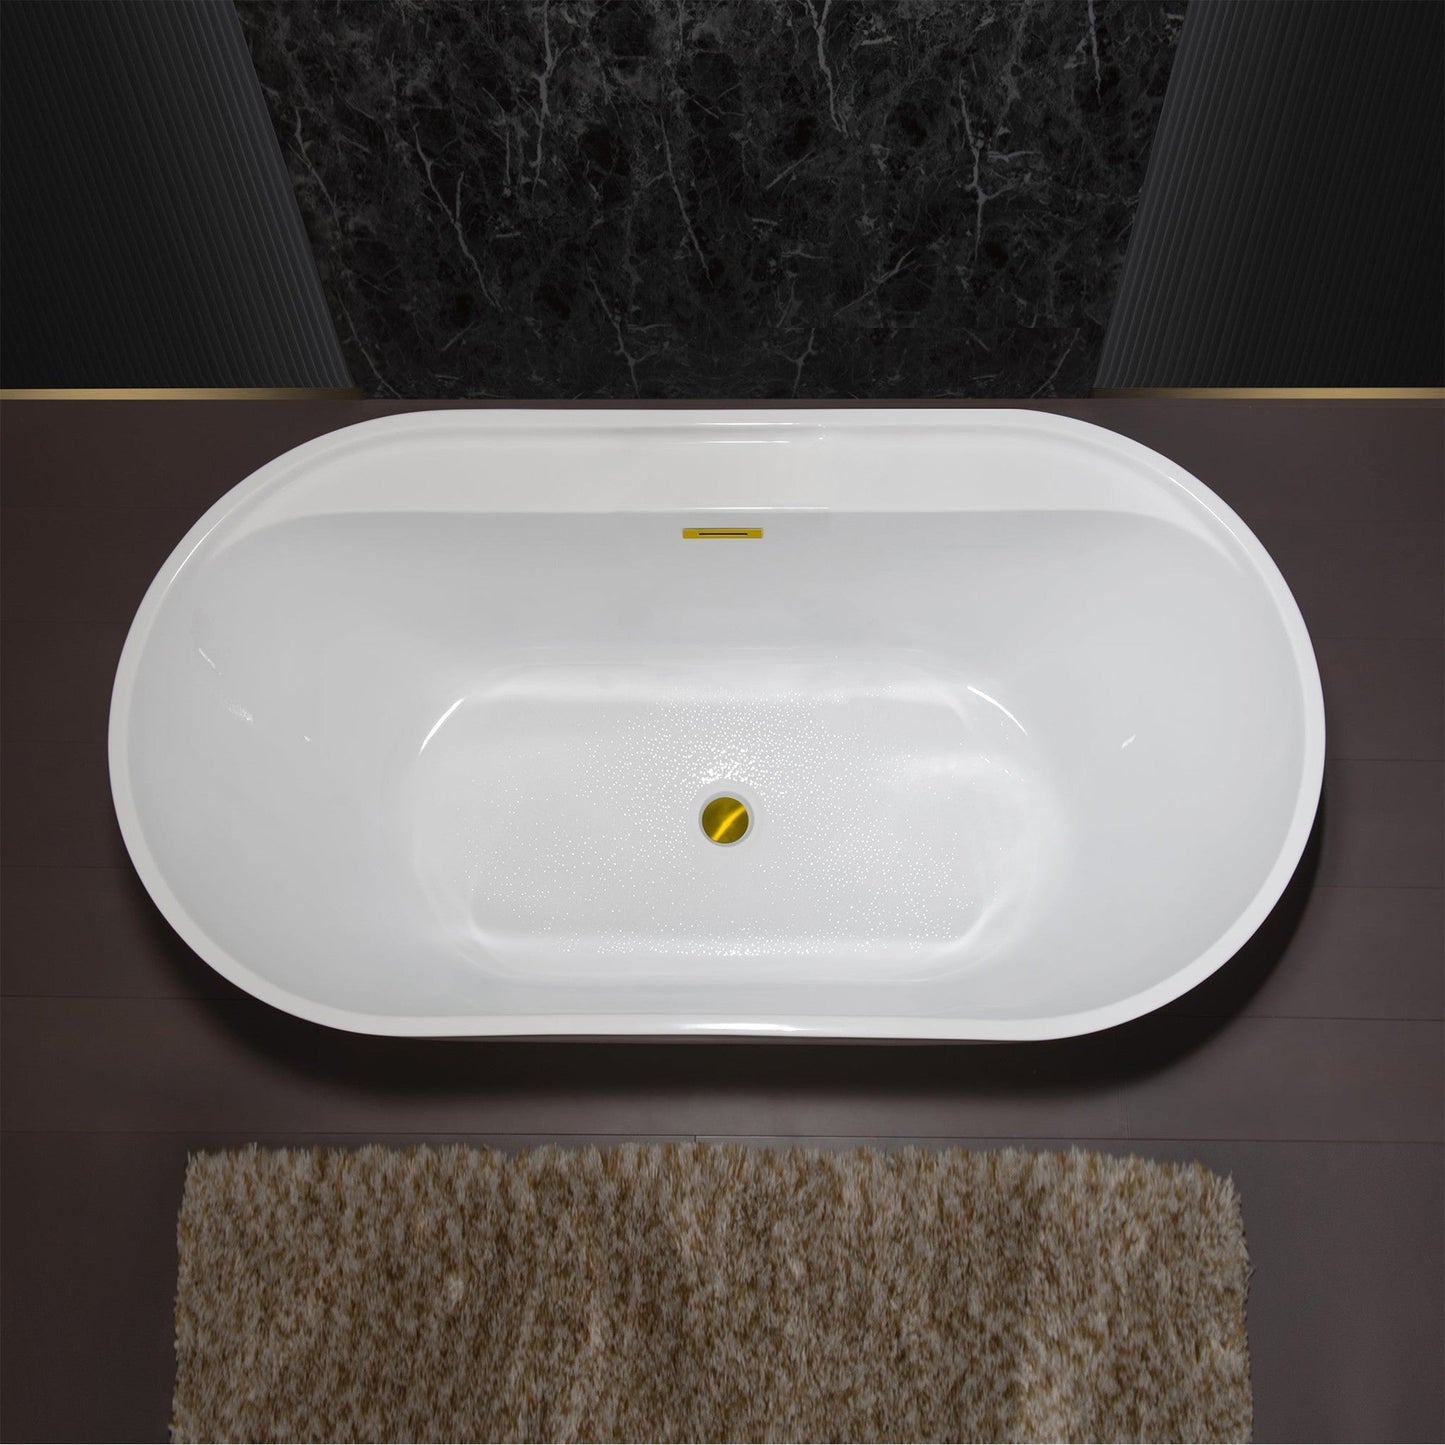 WoodBridge B0064 59" White Acrylic Freestanding Contemporary Soaking Bathtub With Brushed Gold Overflow, Drain, F0073BGVT Tub Filler and Caddy Tray